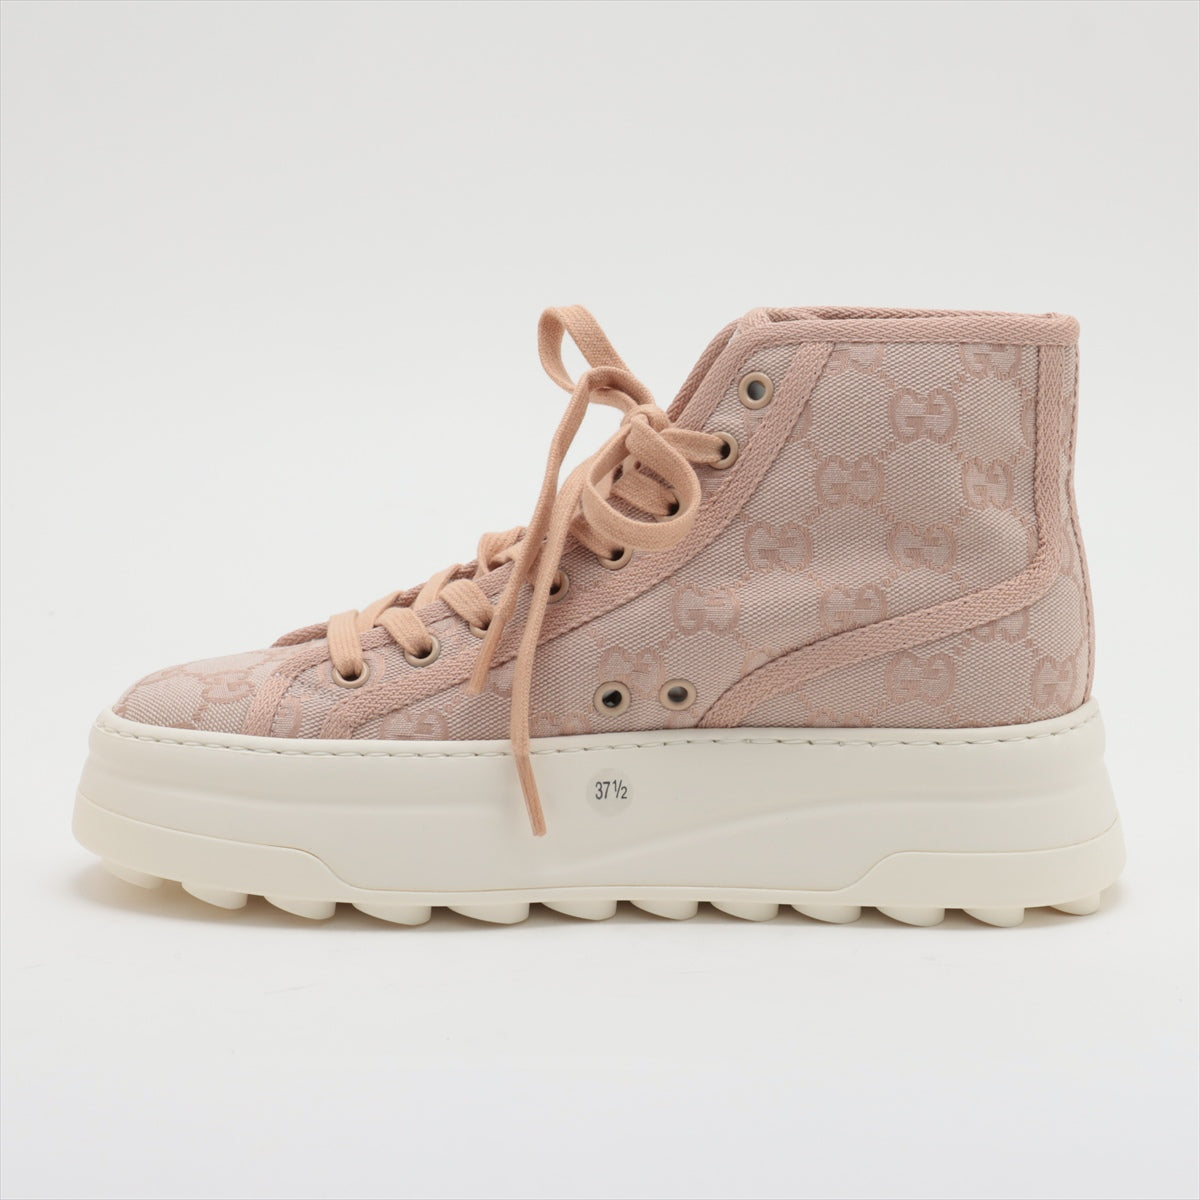 Gucci GG Supreme canvas High-top Sneakers 37.5 Ladies' Pink tennis 1977